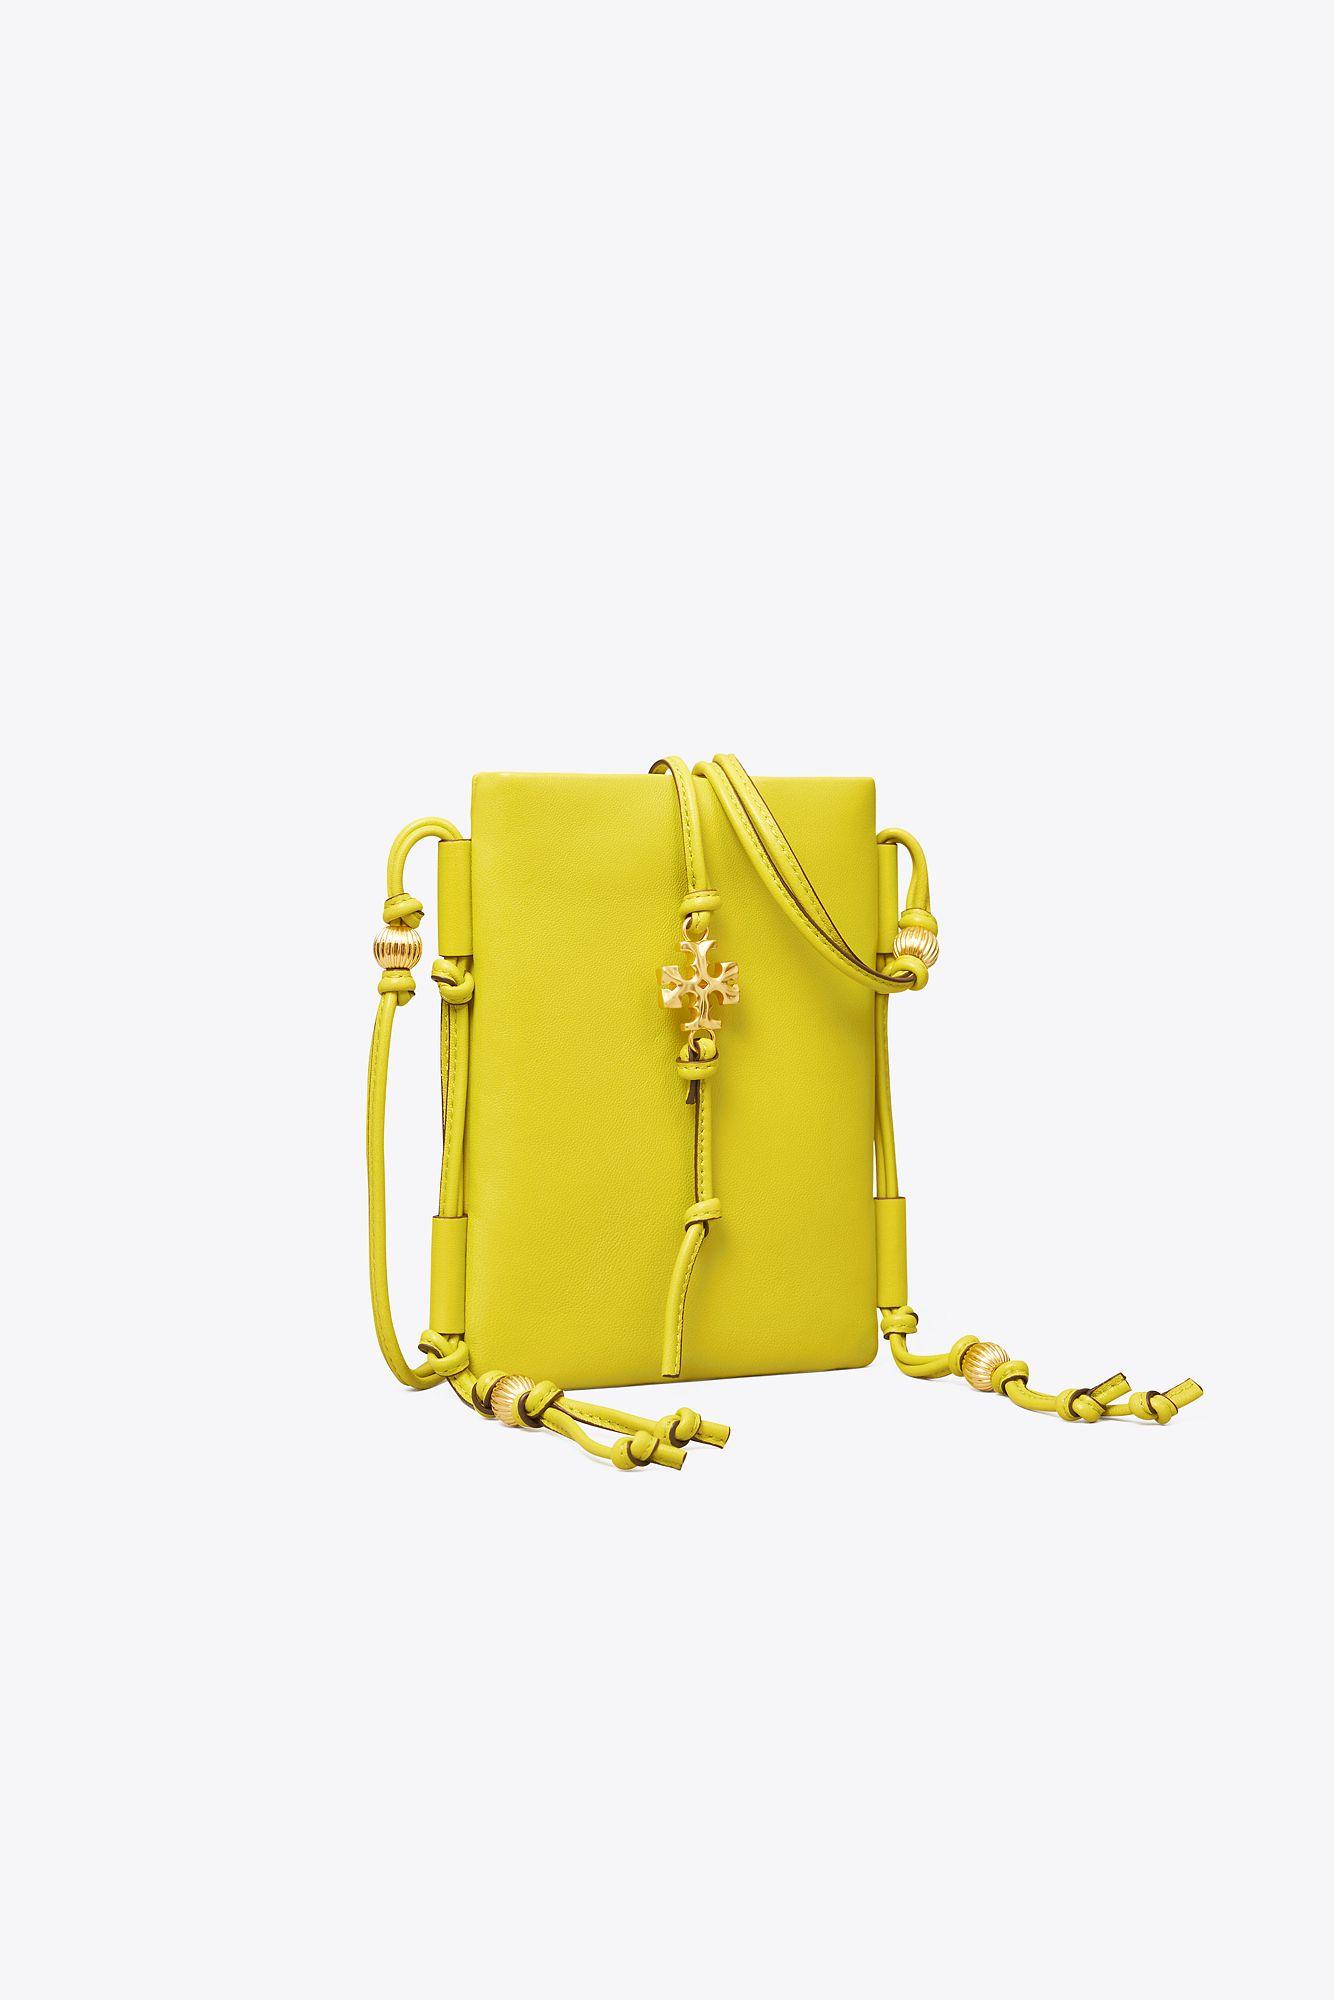 Tory Burch Beaded Strap Soft Phone Bag in Yellow | Lyst